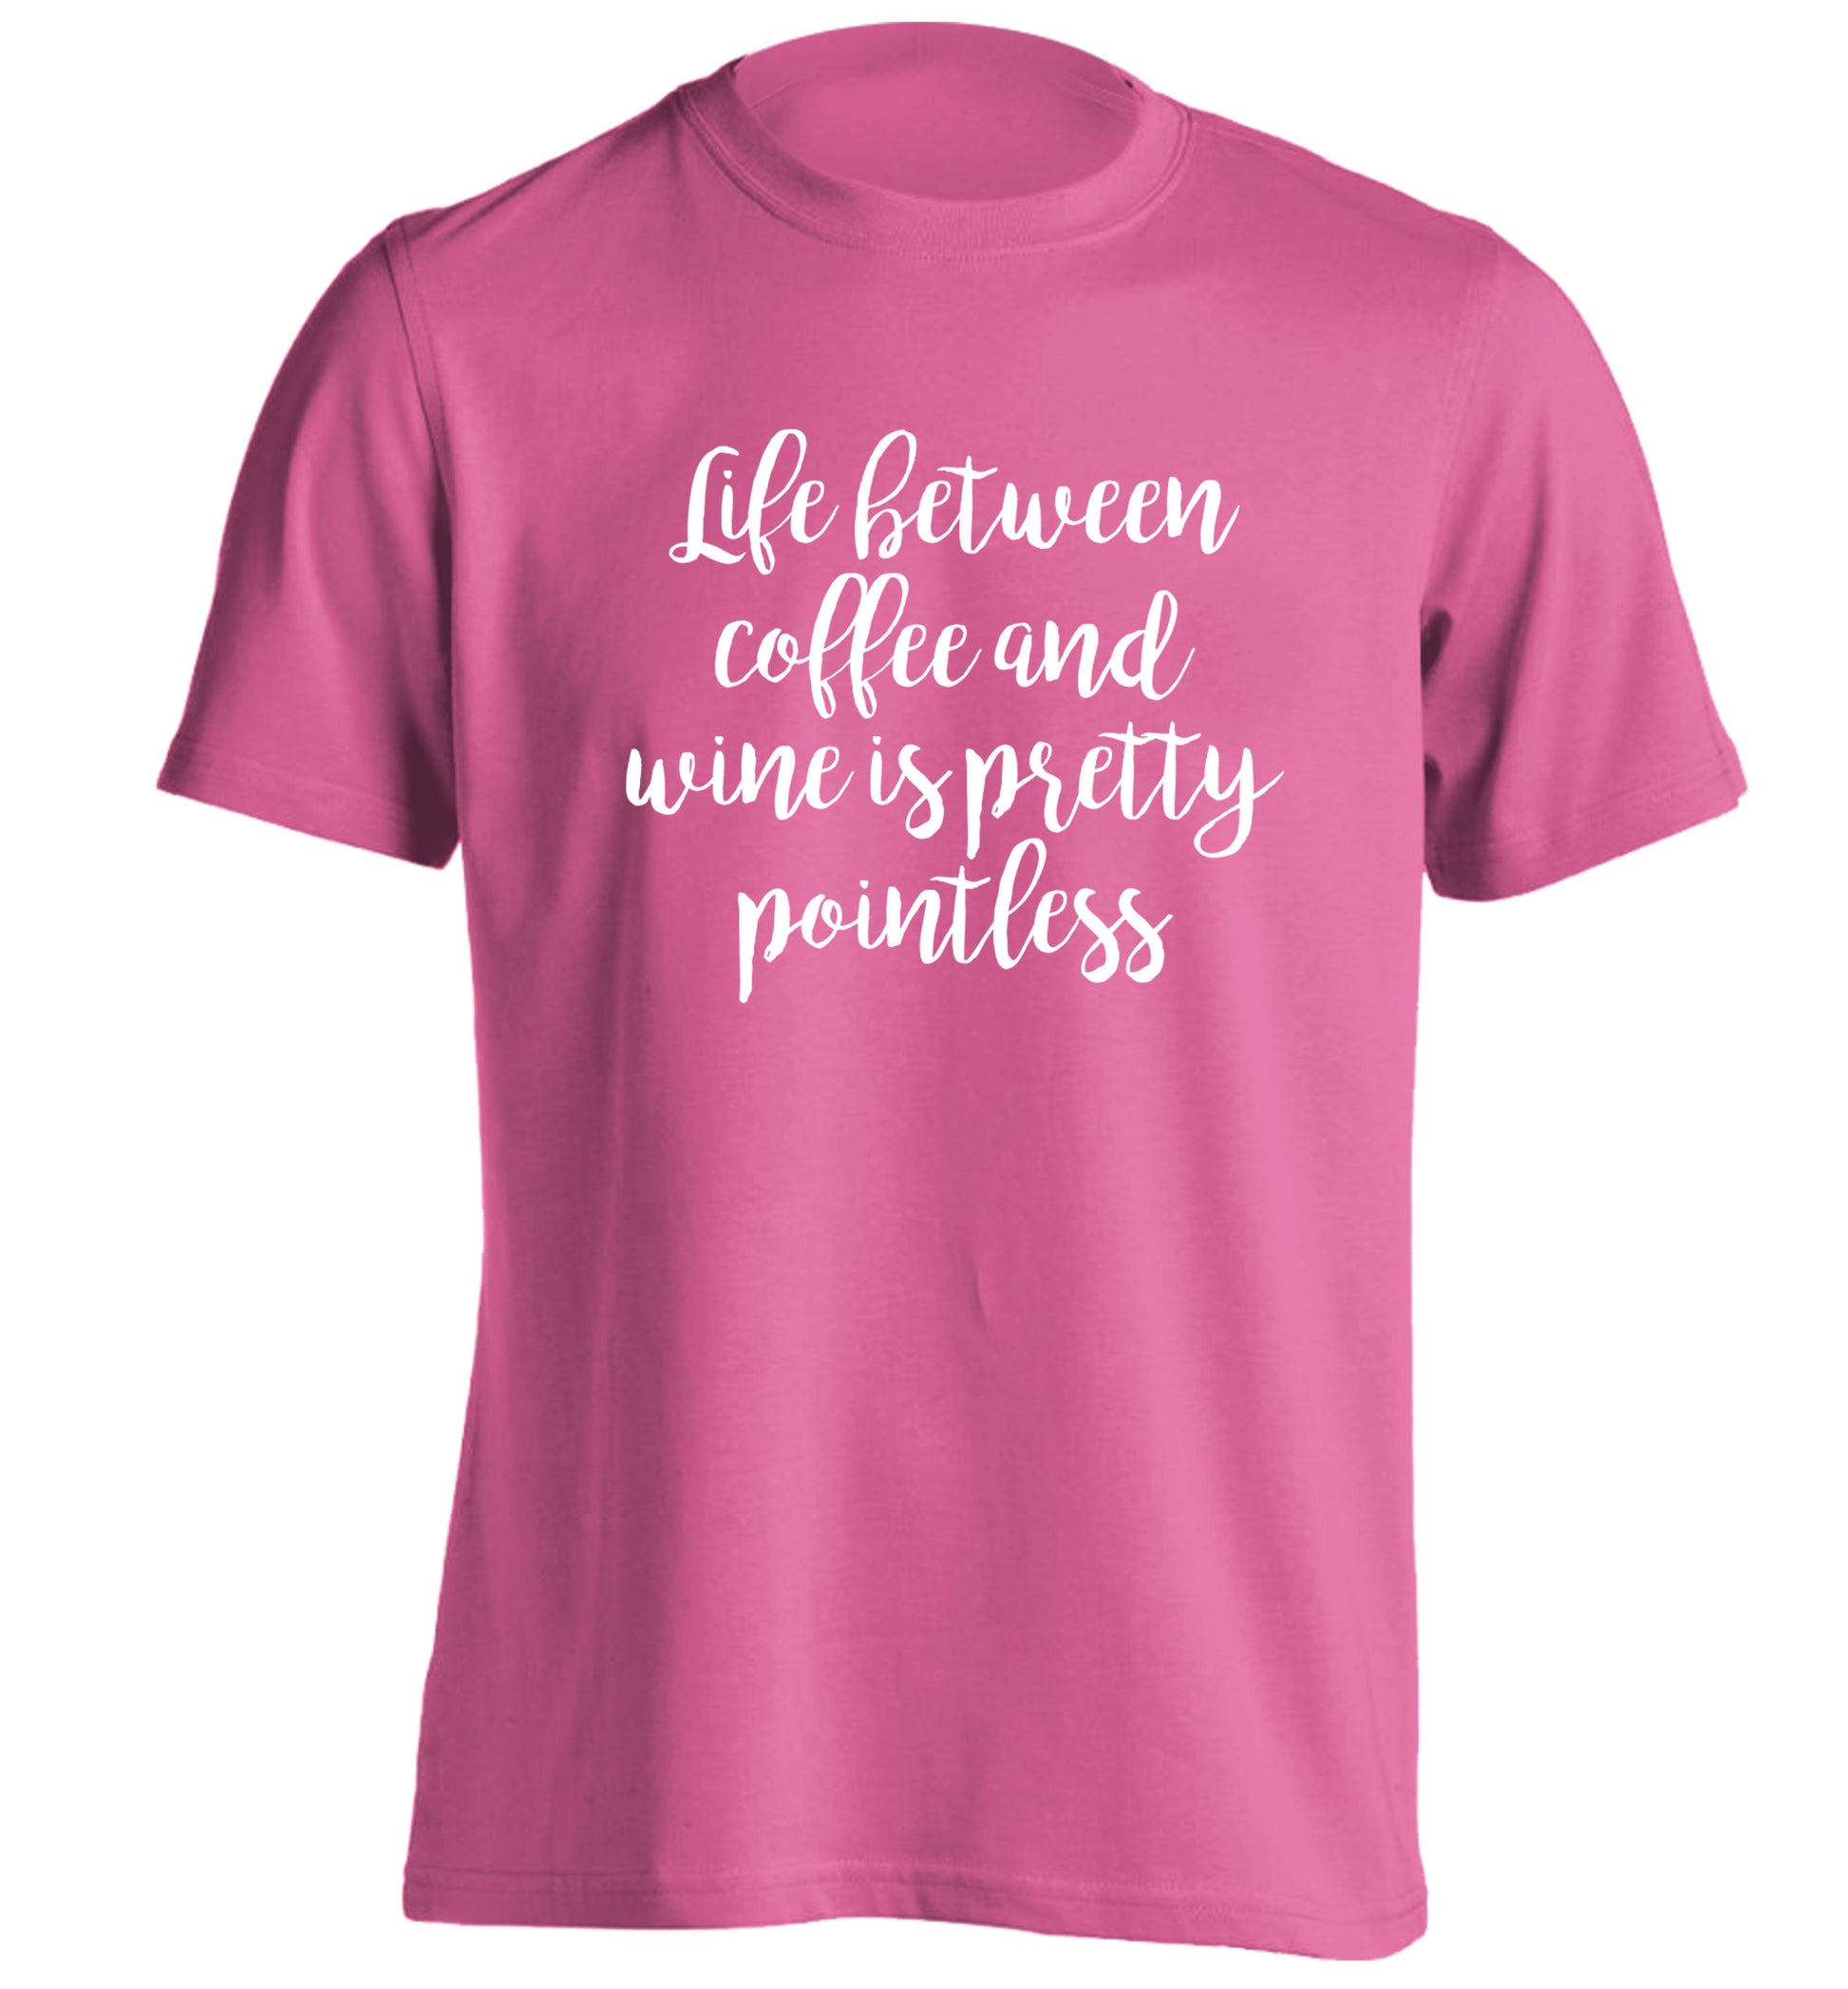 Life between coffee and wine is pretty pointless adults unisex pink Tshirt 2XL